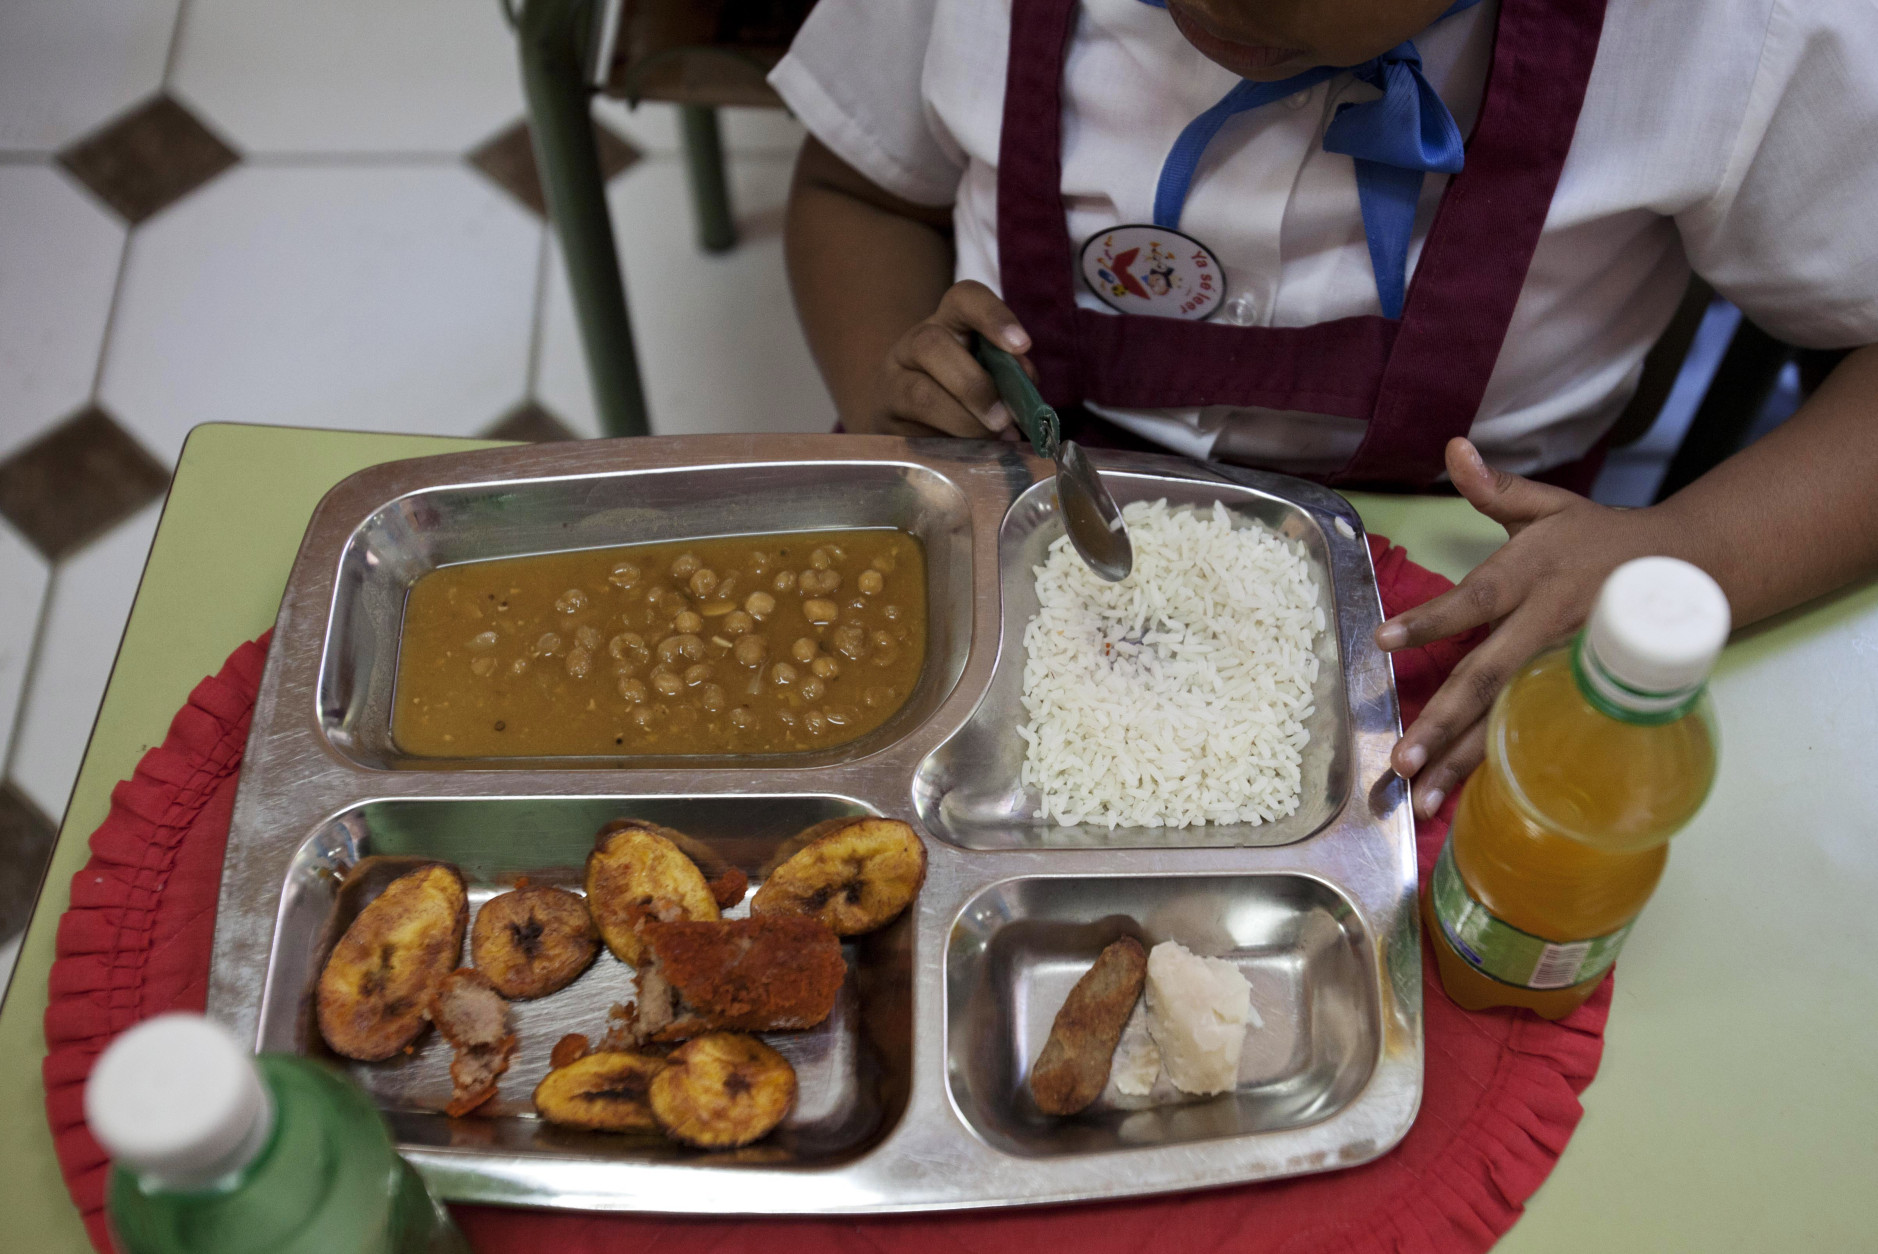 Milagro Ramos, a student at the Angela Landa elementary school, spoons up rice from her lunch tray, which also contains a chicken croquette, a piece of taro root and yellow pea soup in Old Havana, Cuba, Tuesday, May 6, 2014. Milagro brought fried plantains, lower left corner of her tray, and an orange drink from home. The children provide their own drinks. (AP Photo/Franklin Reyes)